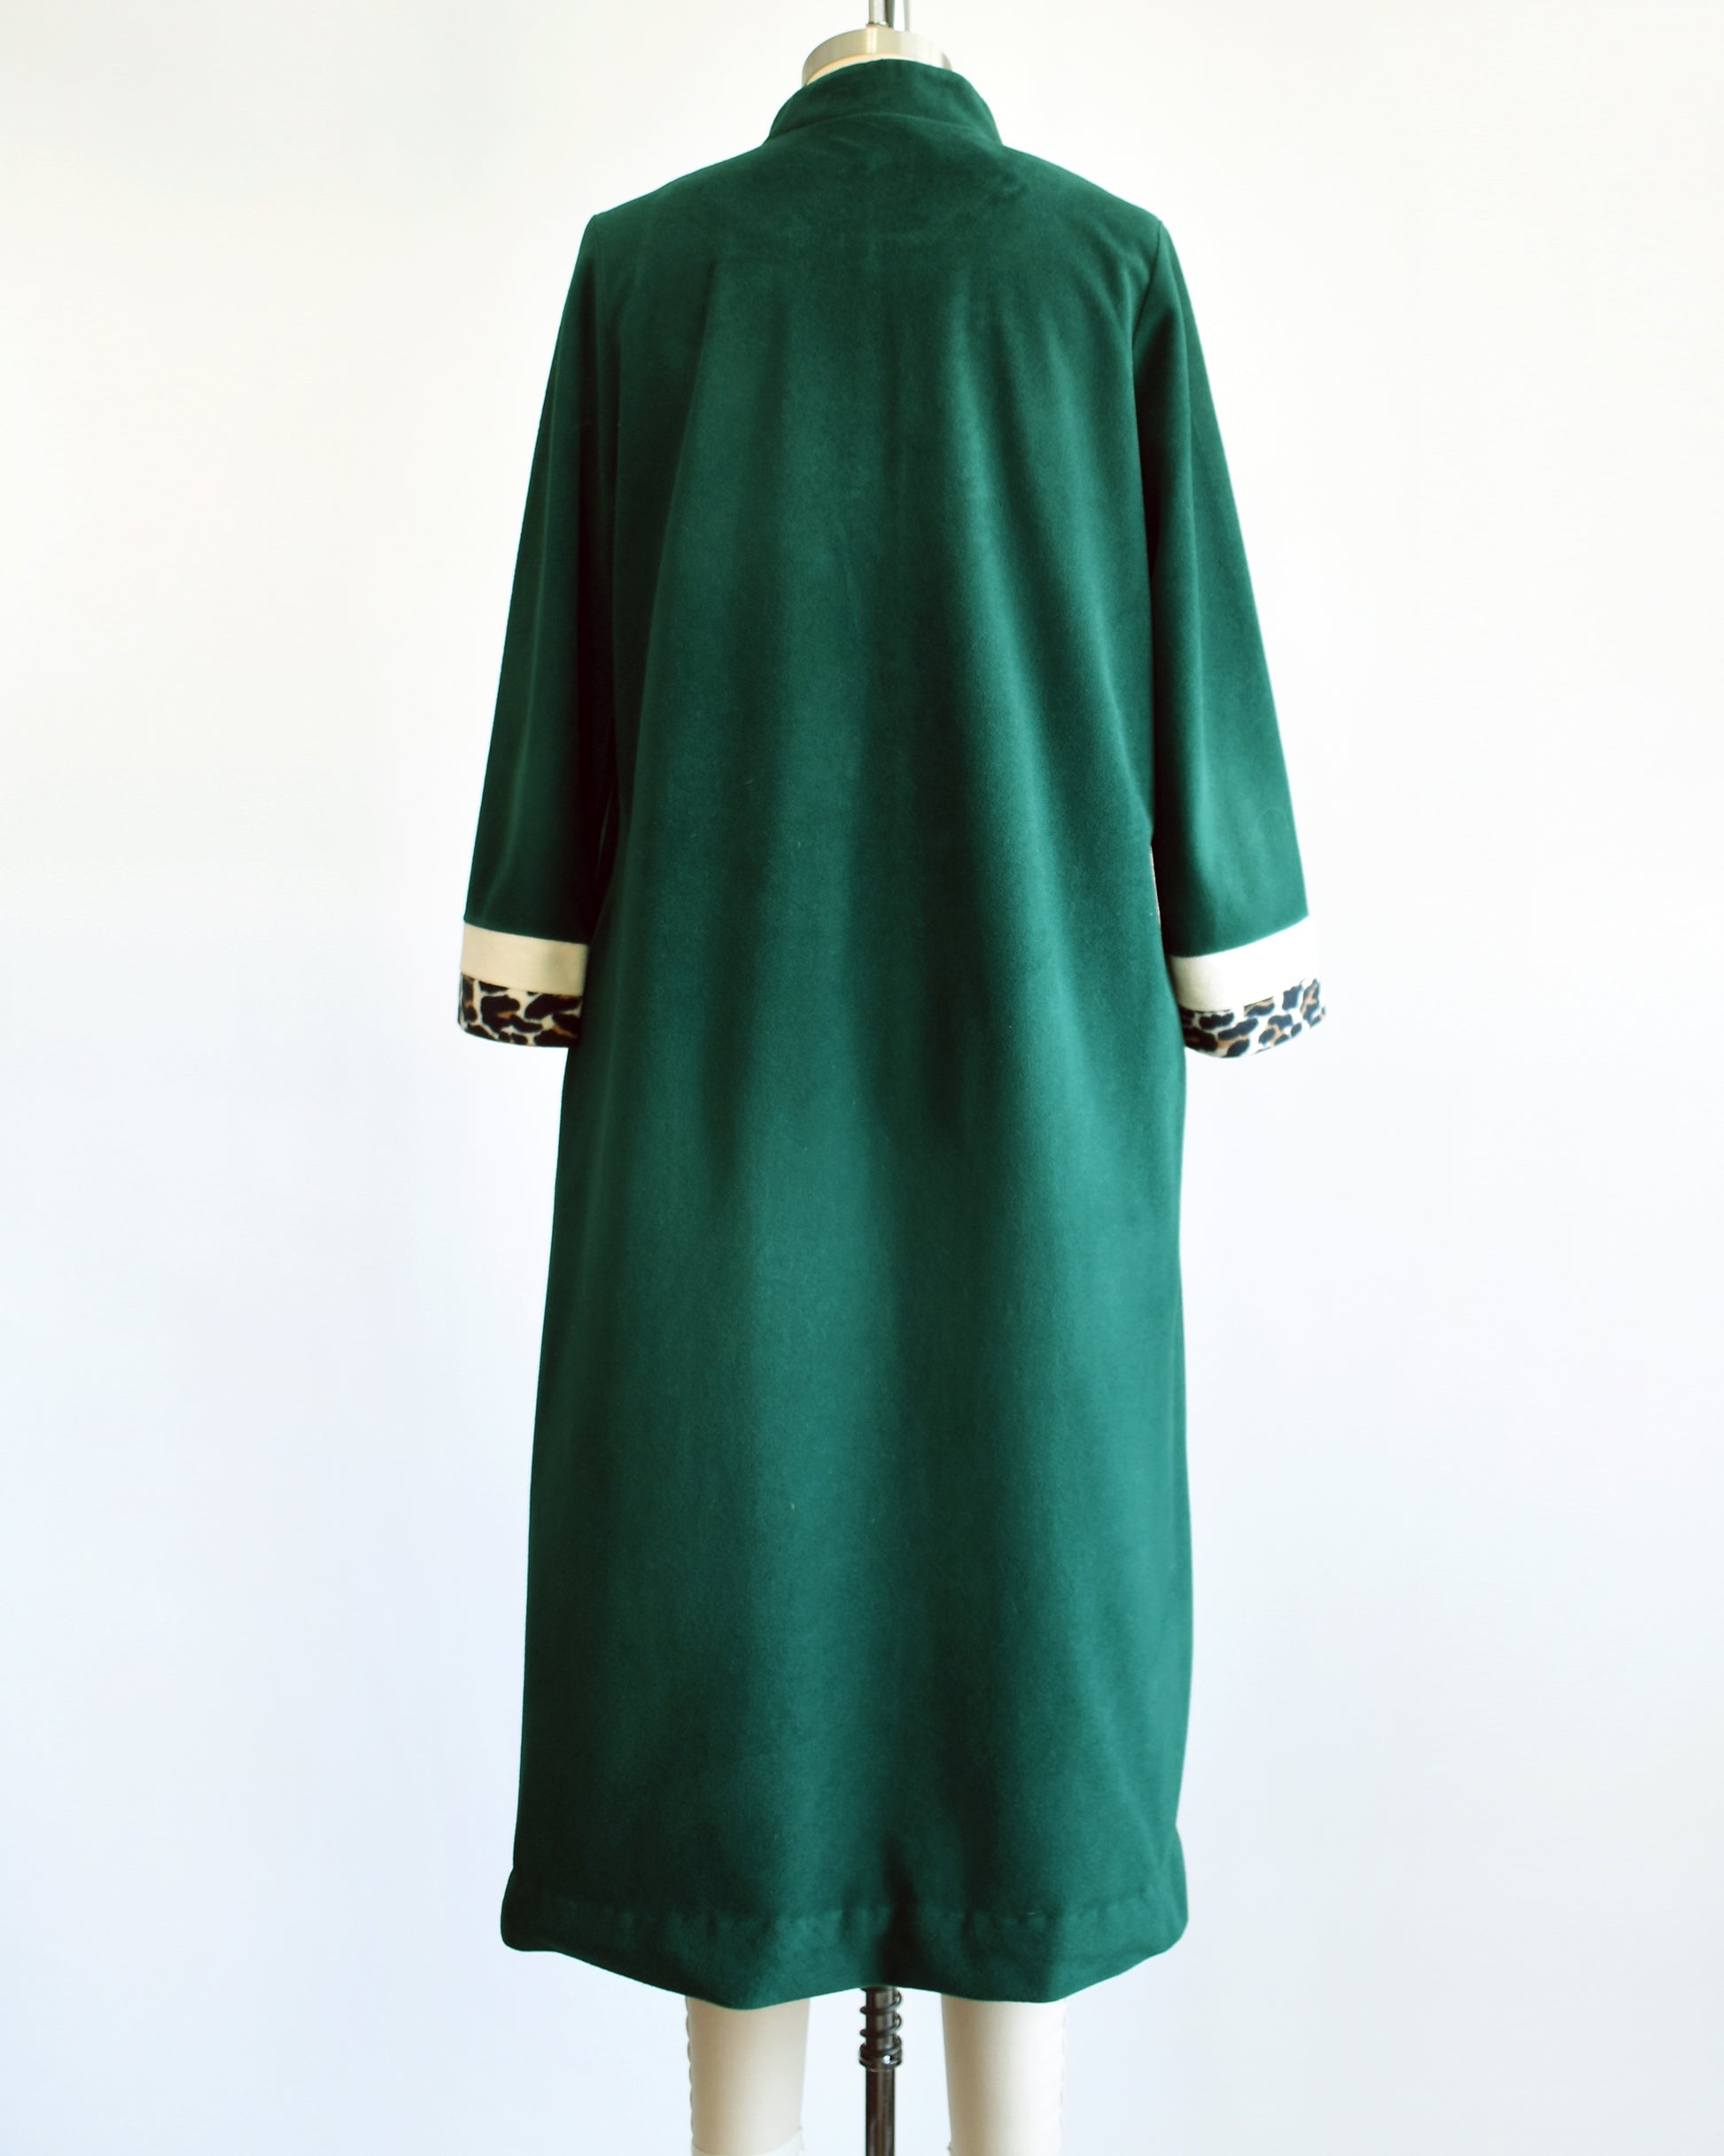 Back view of a vintage 1970s robe by Vanity Fair that is green with white leopard print stripes on the cuffs